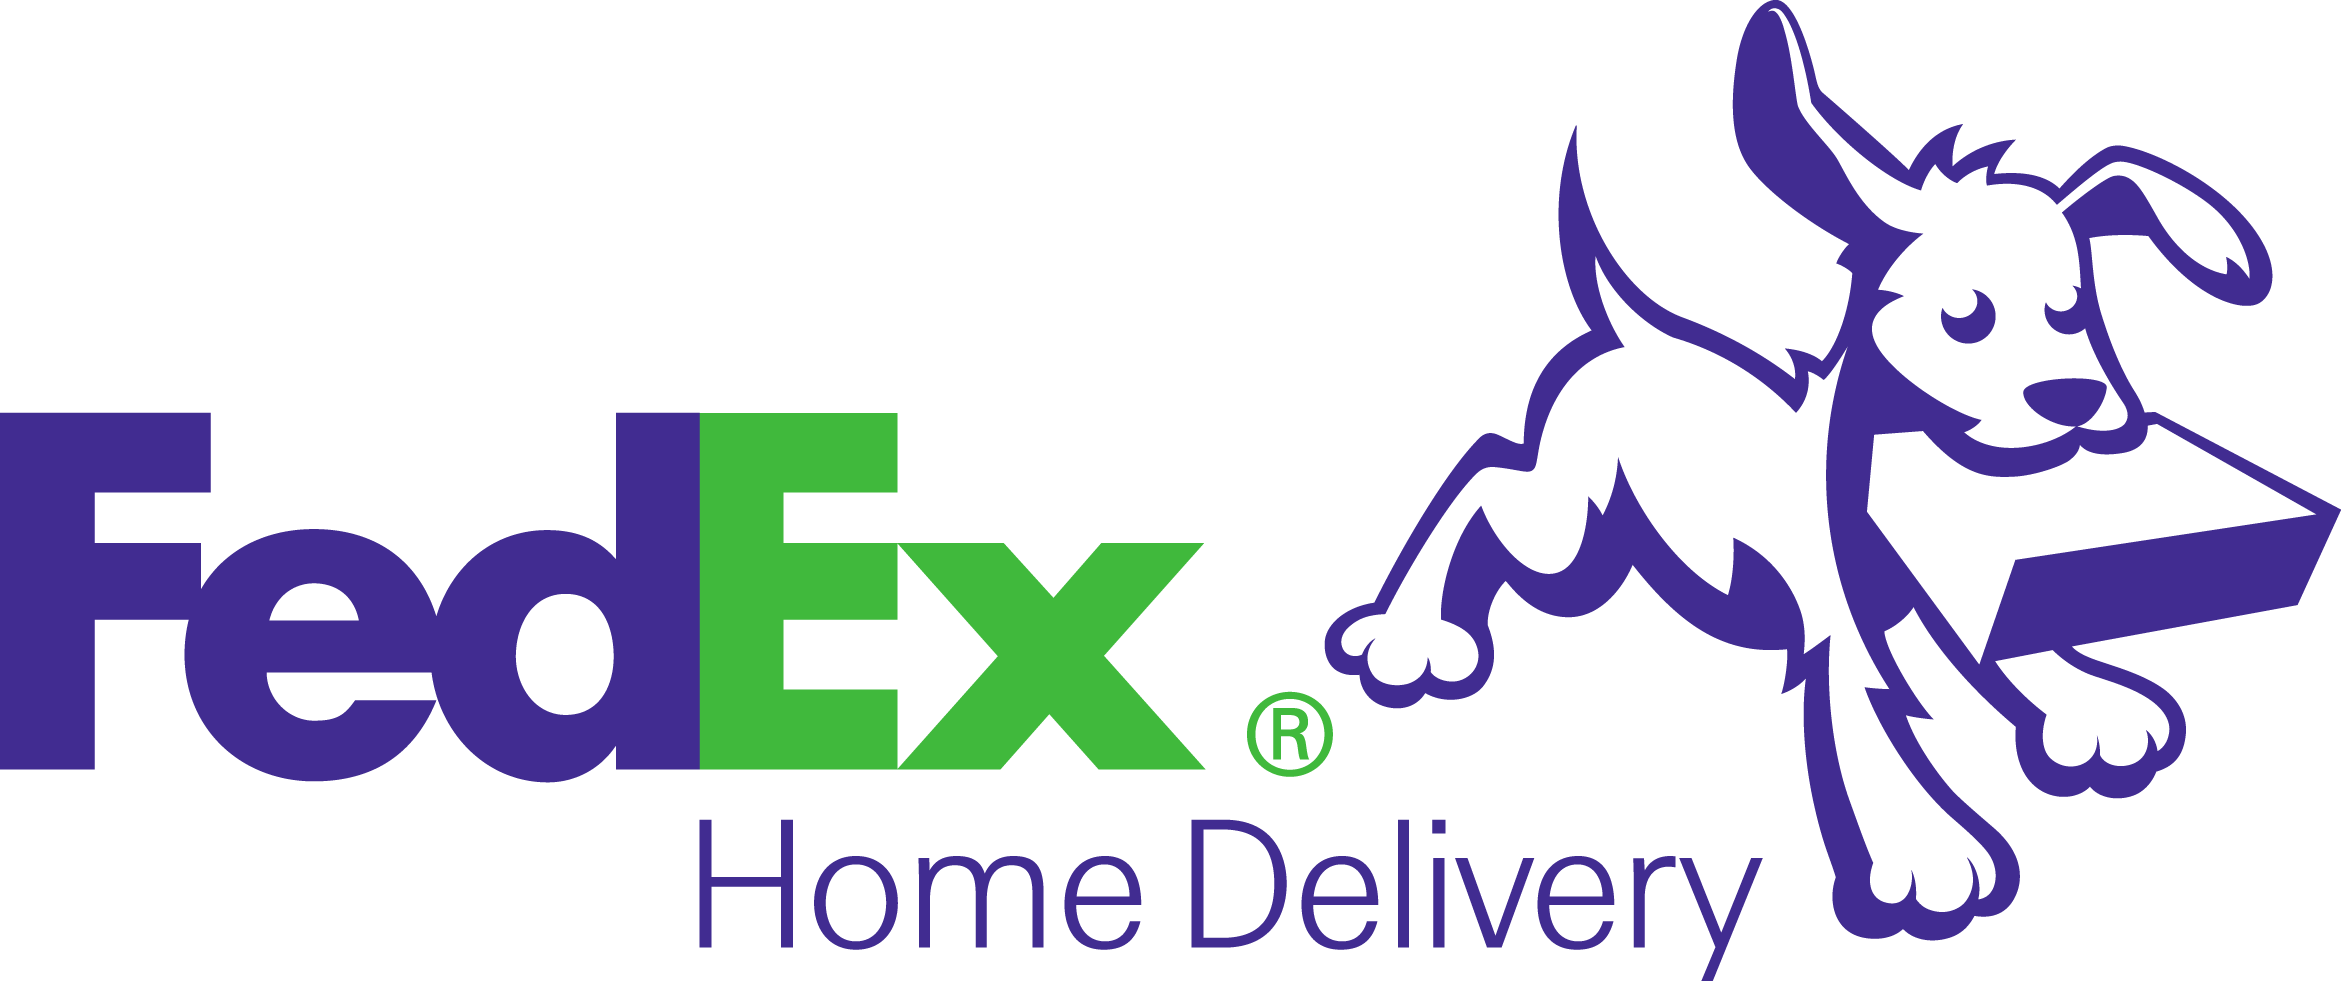 Fed-Ex Home Delivery